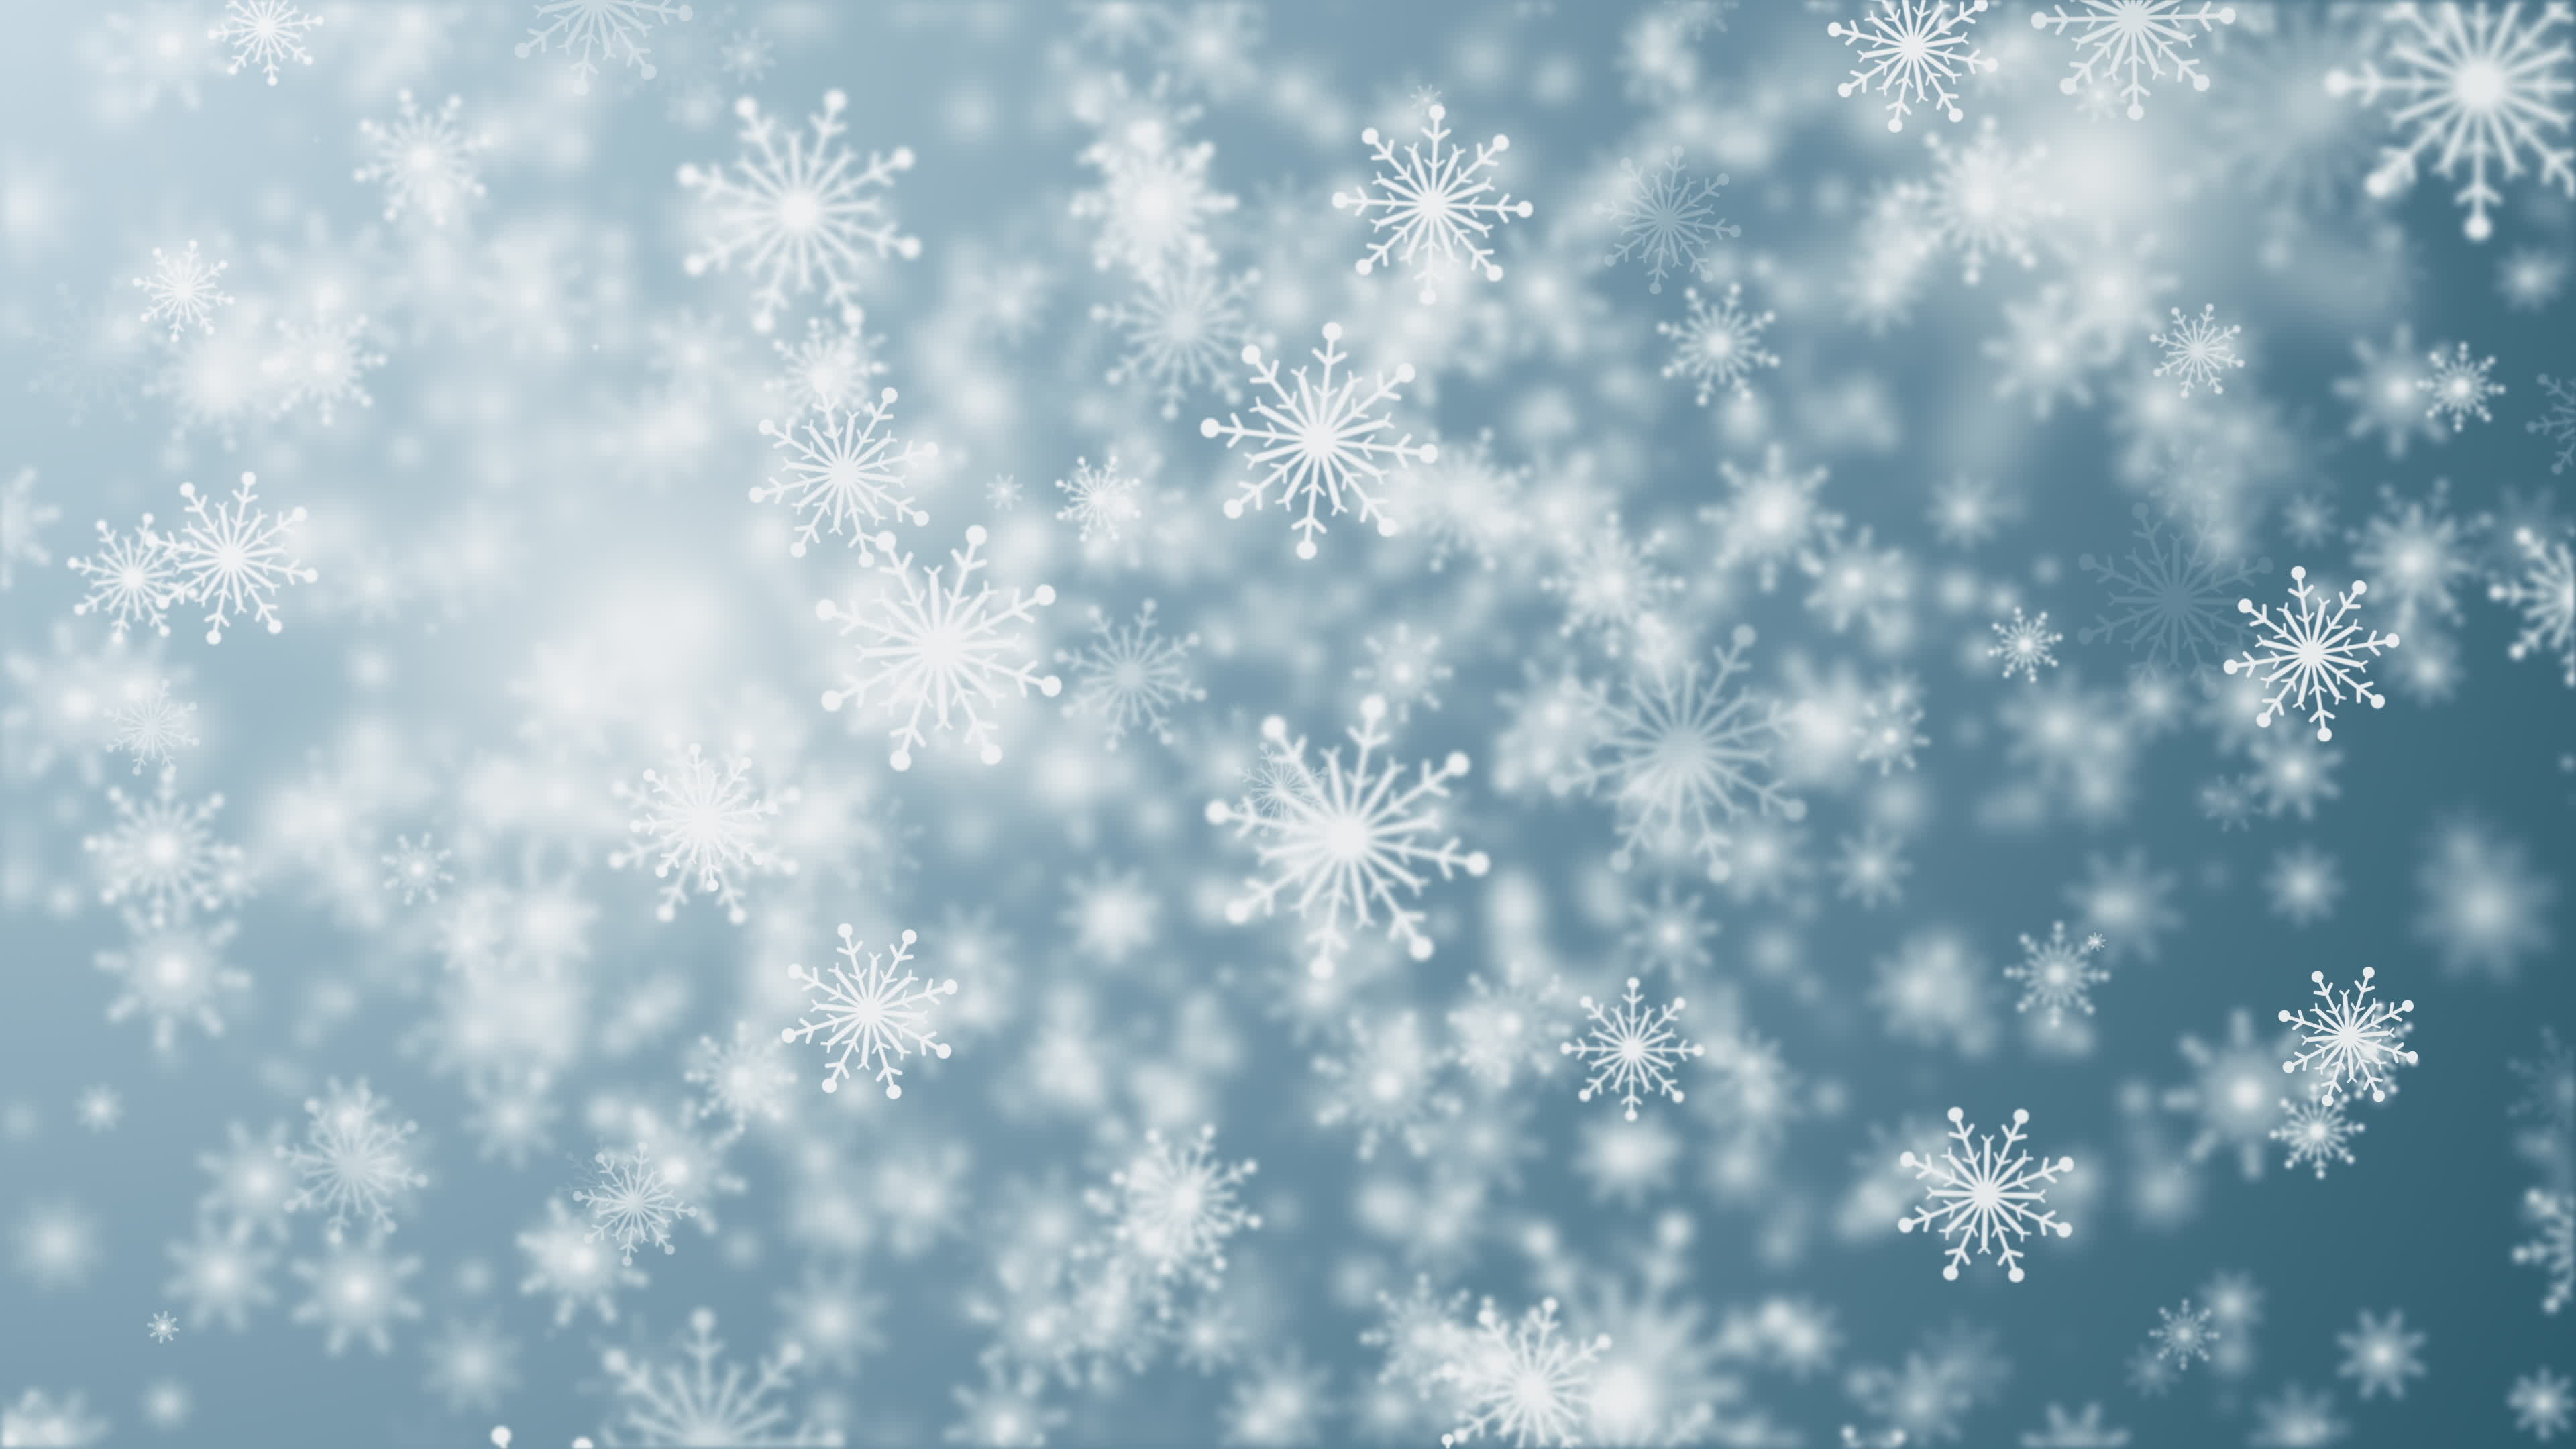 Snowflakes Stock Video Footage for Free Download